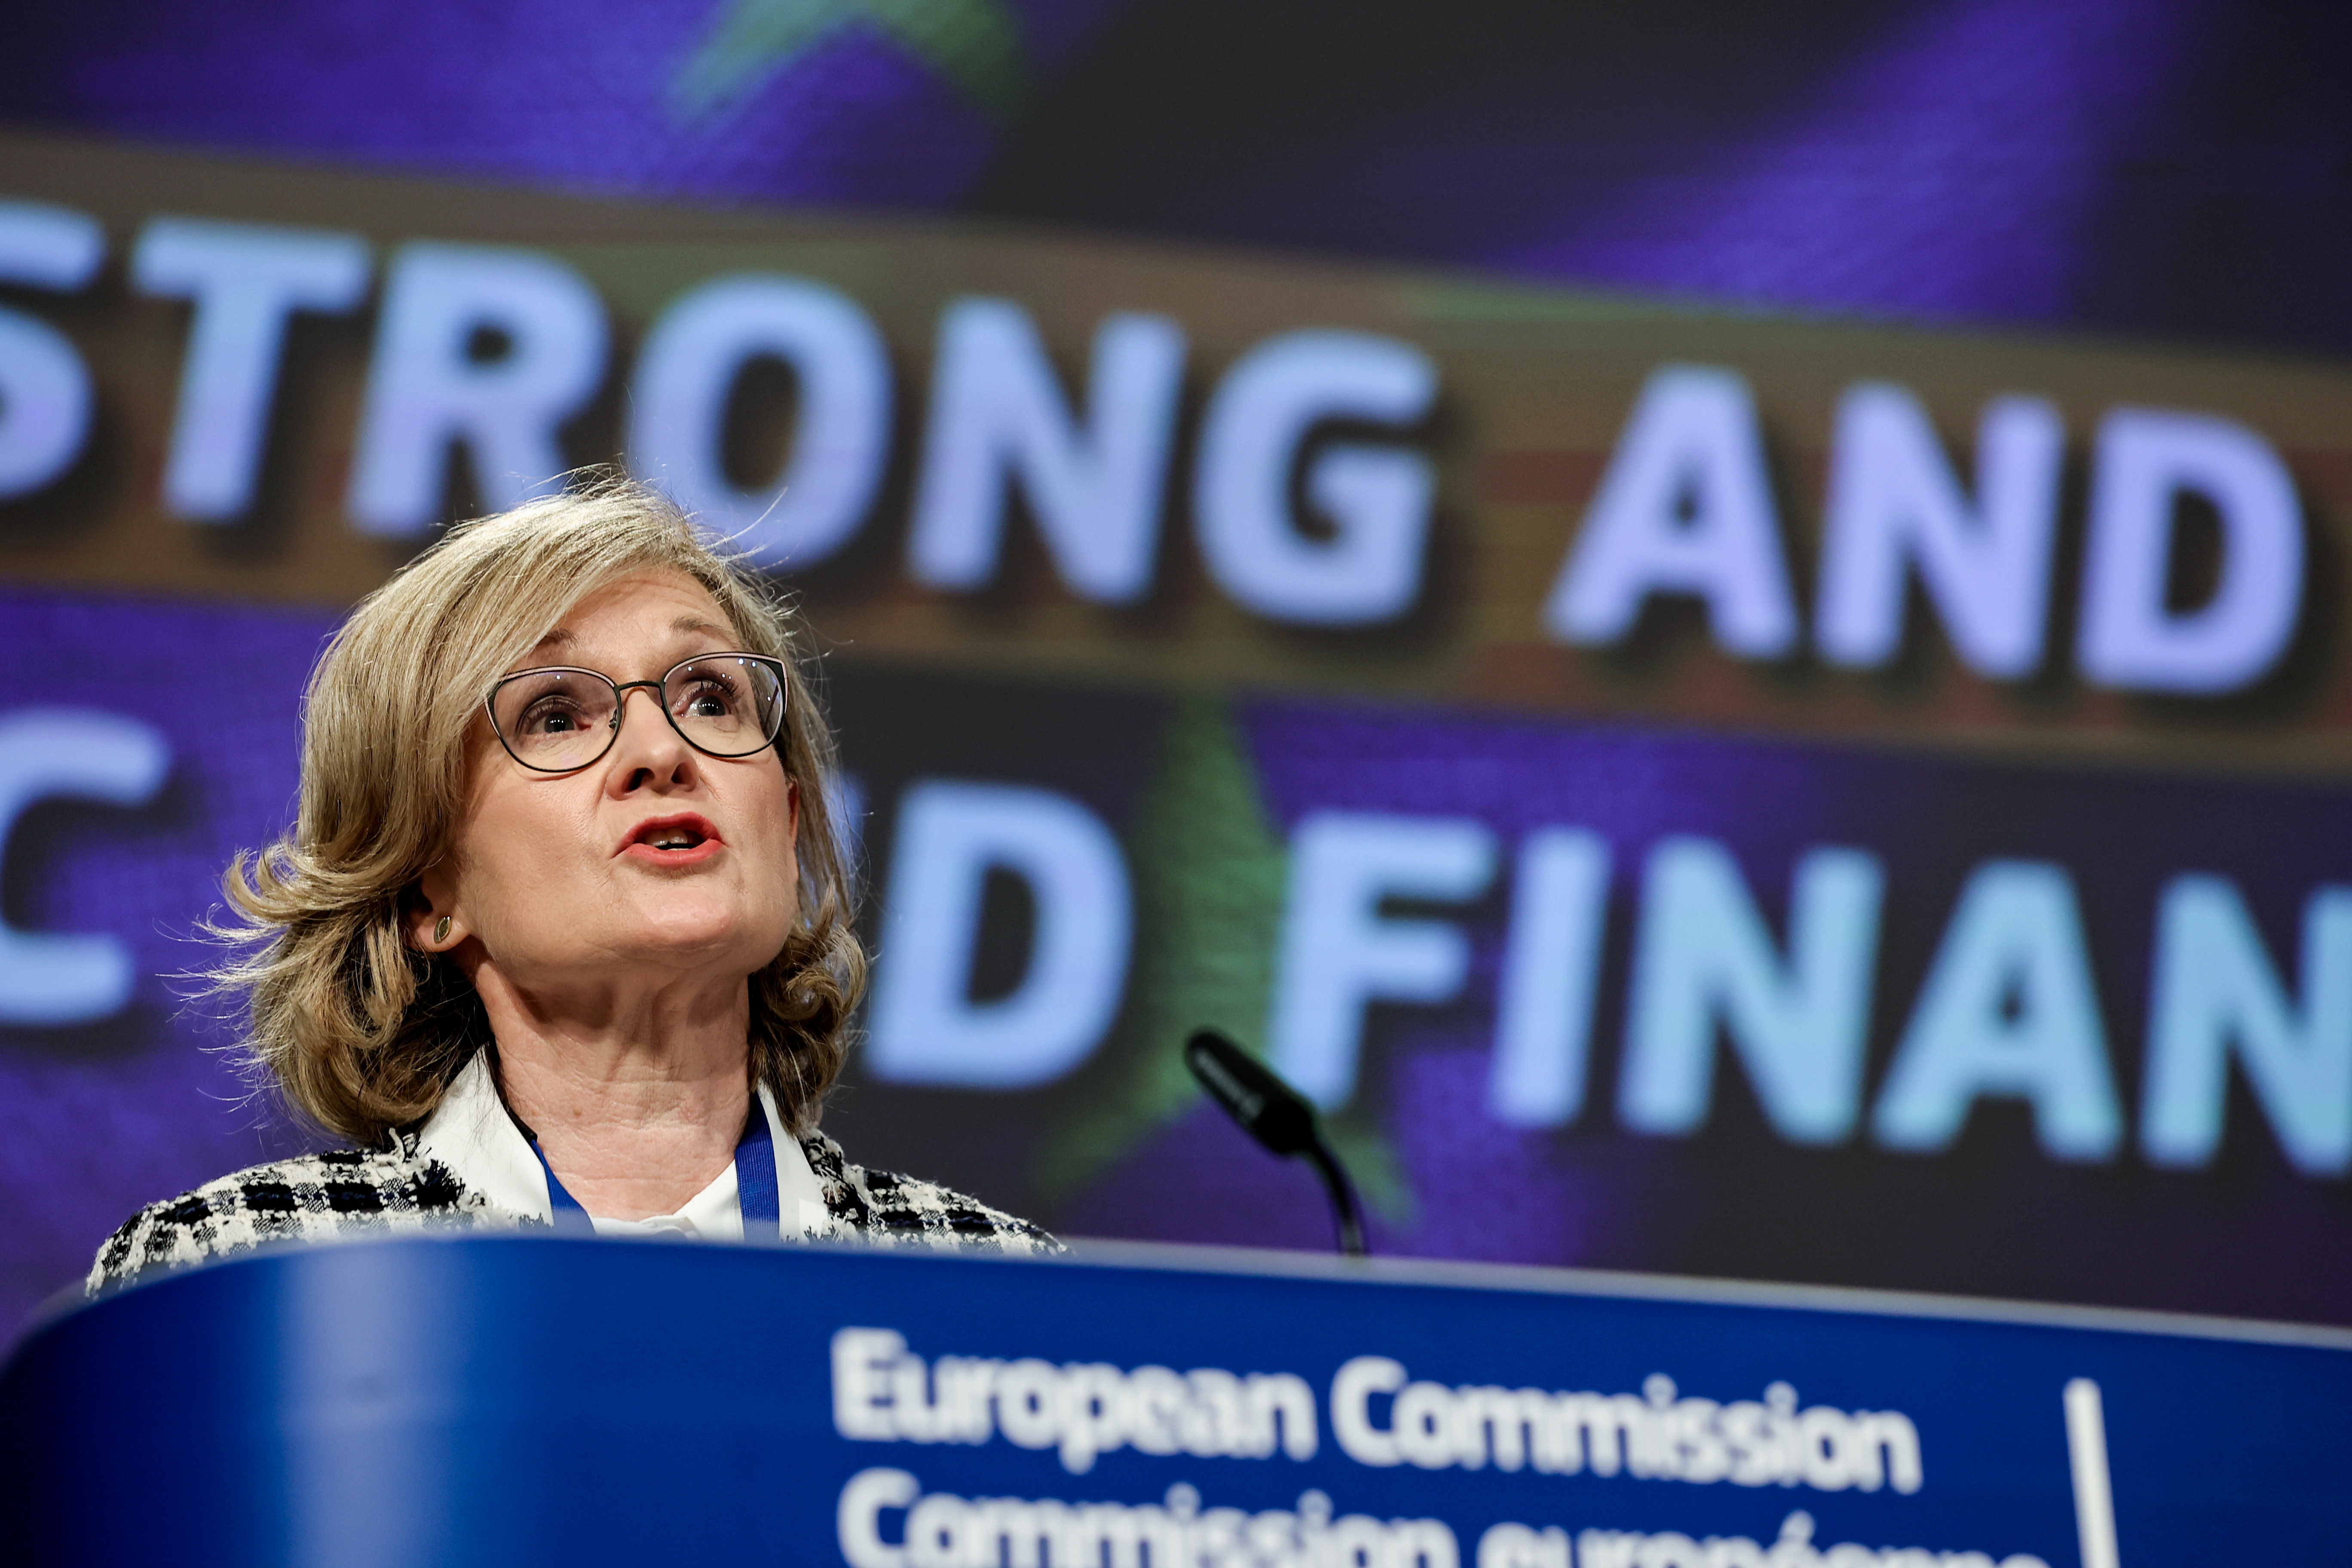 EU Commissioner Financial Services, Stability and the Capital Markets Union Mairead McGuinness speaks at a news conference on the fostering the openness, strength and resilience of Europe's economic and financial system in Brussels, Belgium January 19, 2021 at the European Union headquarters. Kenzo Tribouillard/Pool via REUTERS